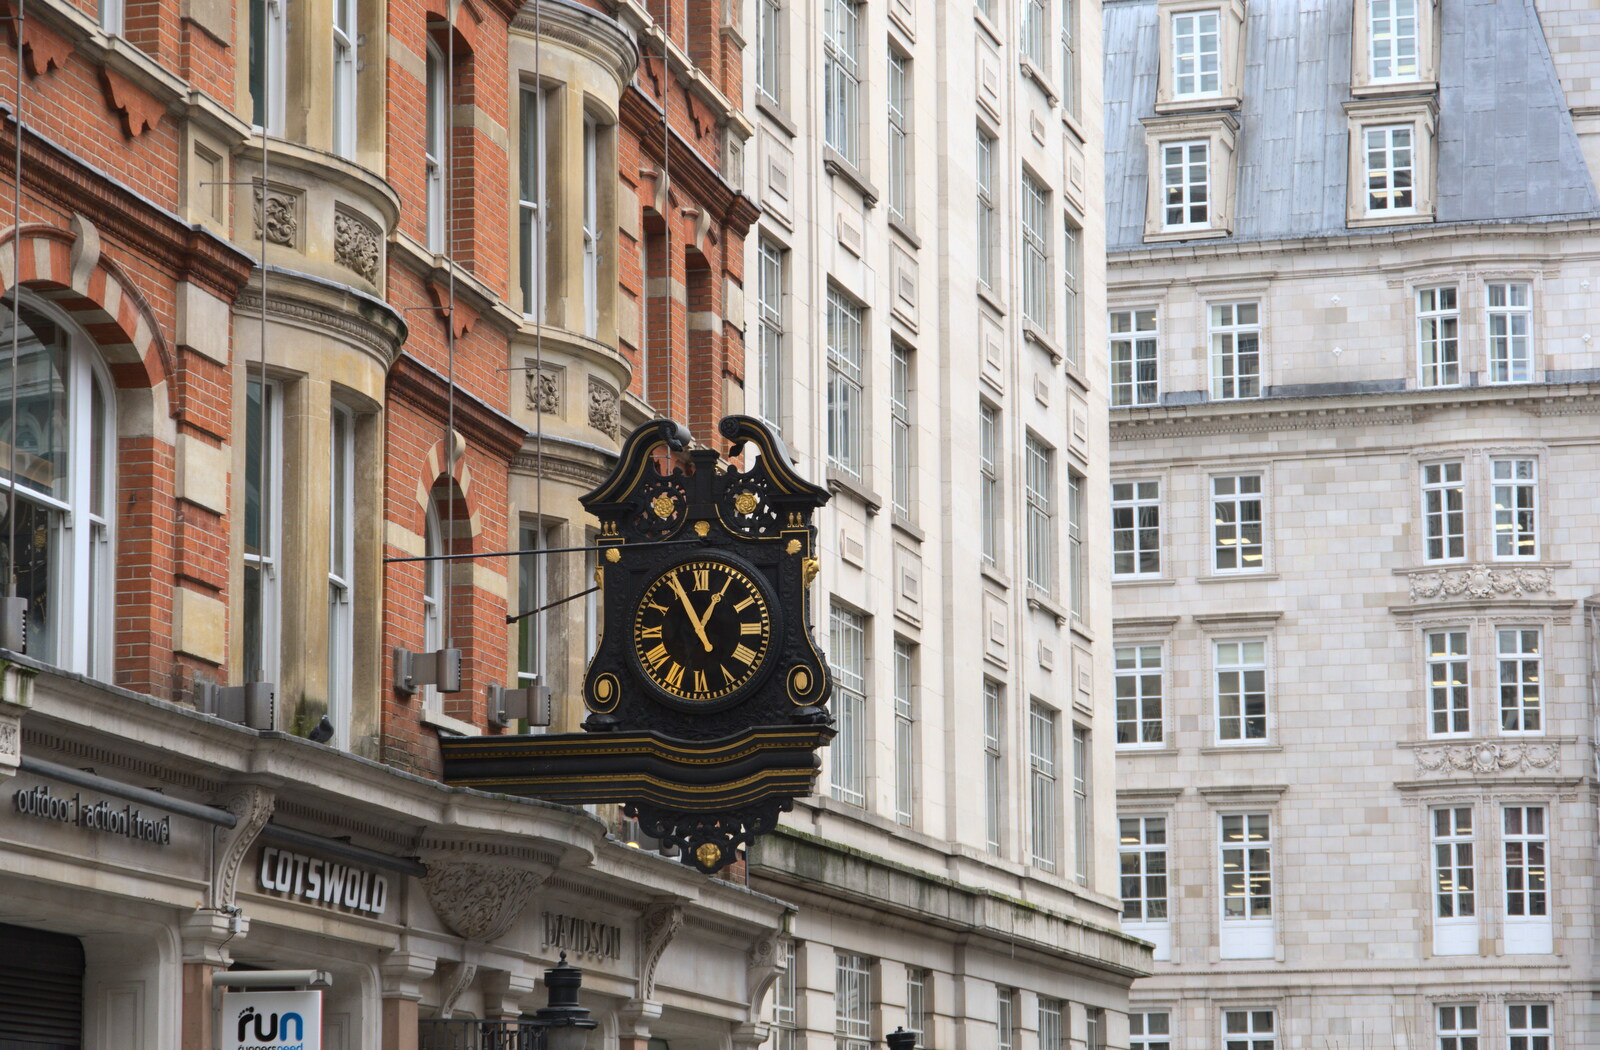 A big clock on Southampton Street from A SwiftKey Memorial Service, Covent Garden, London  - 13th March 2020